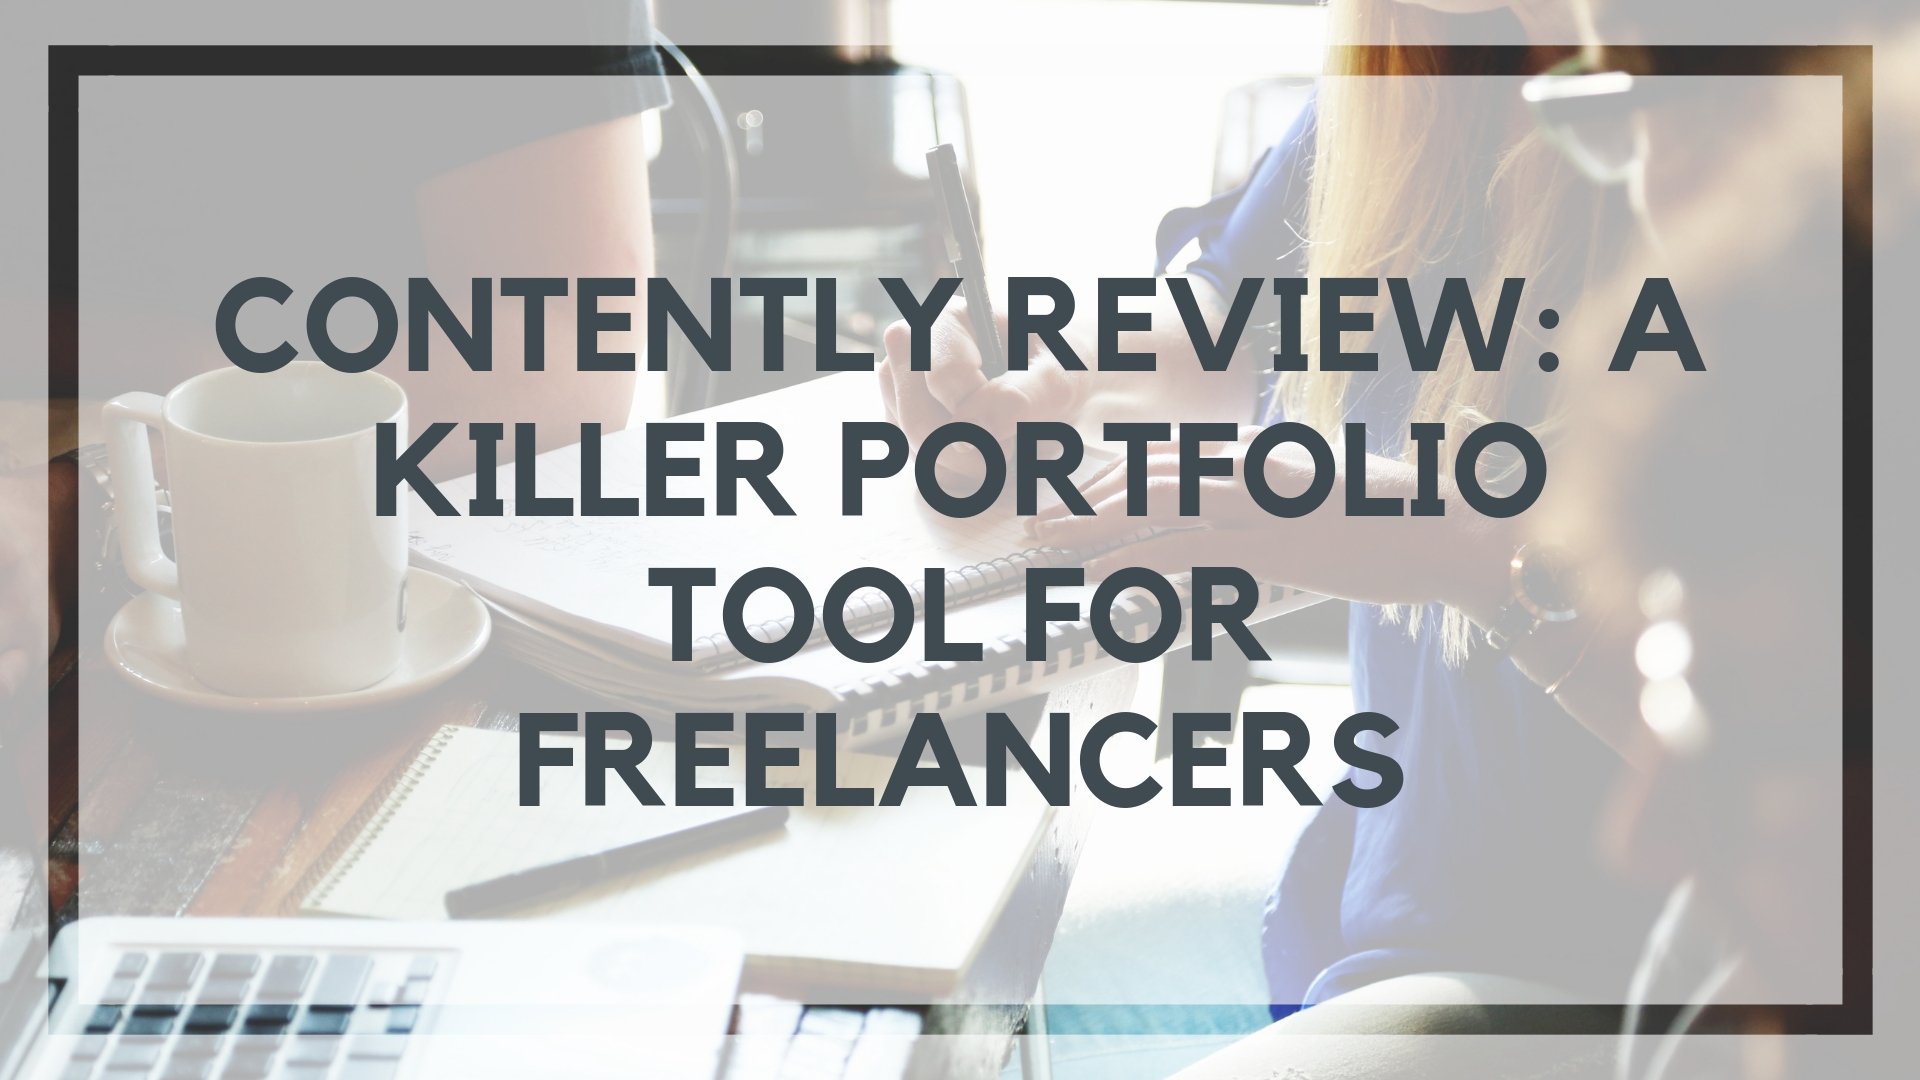 Contently Review: A Killer Portfolio Tool for Freelance Writers